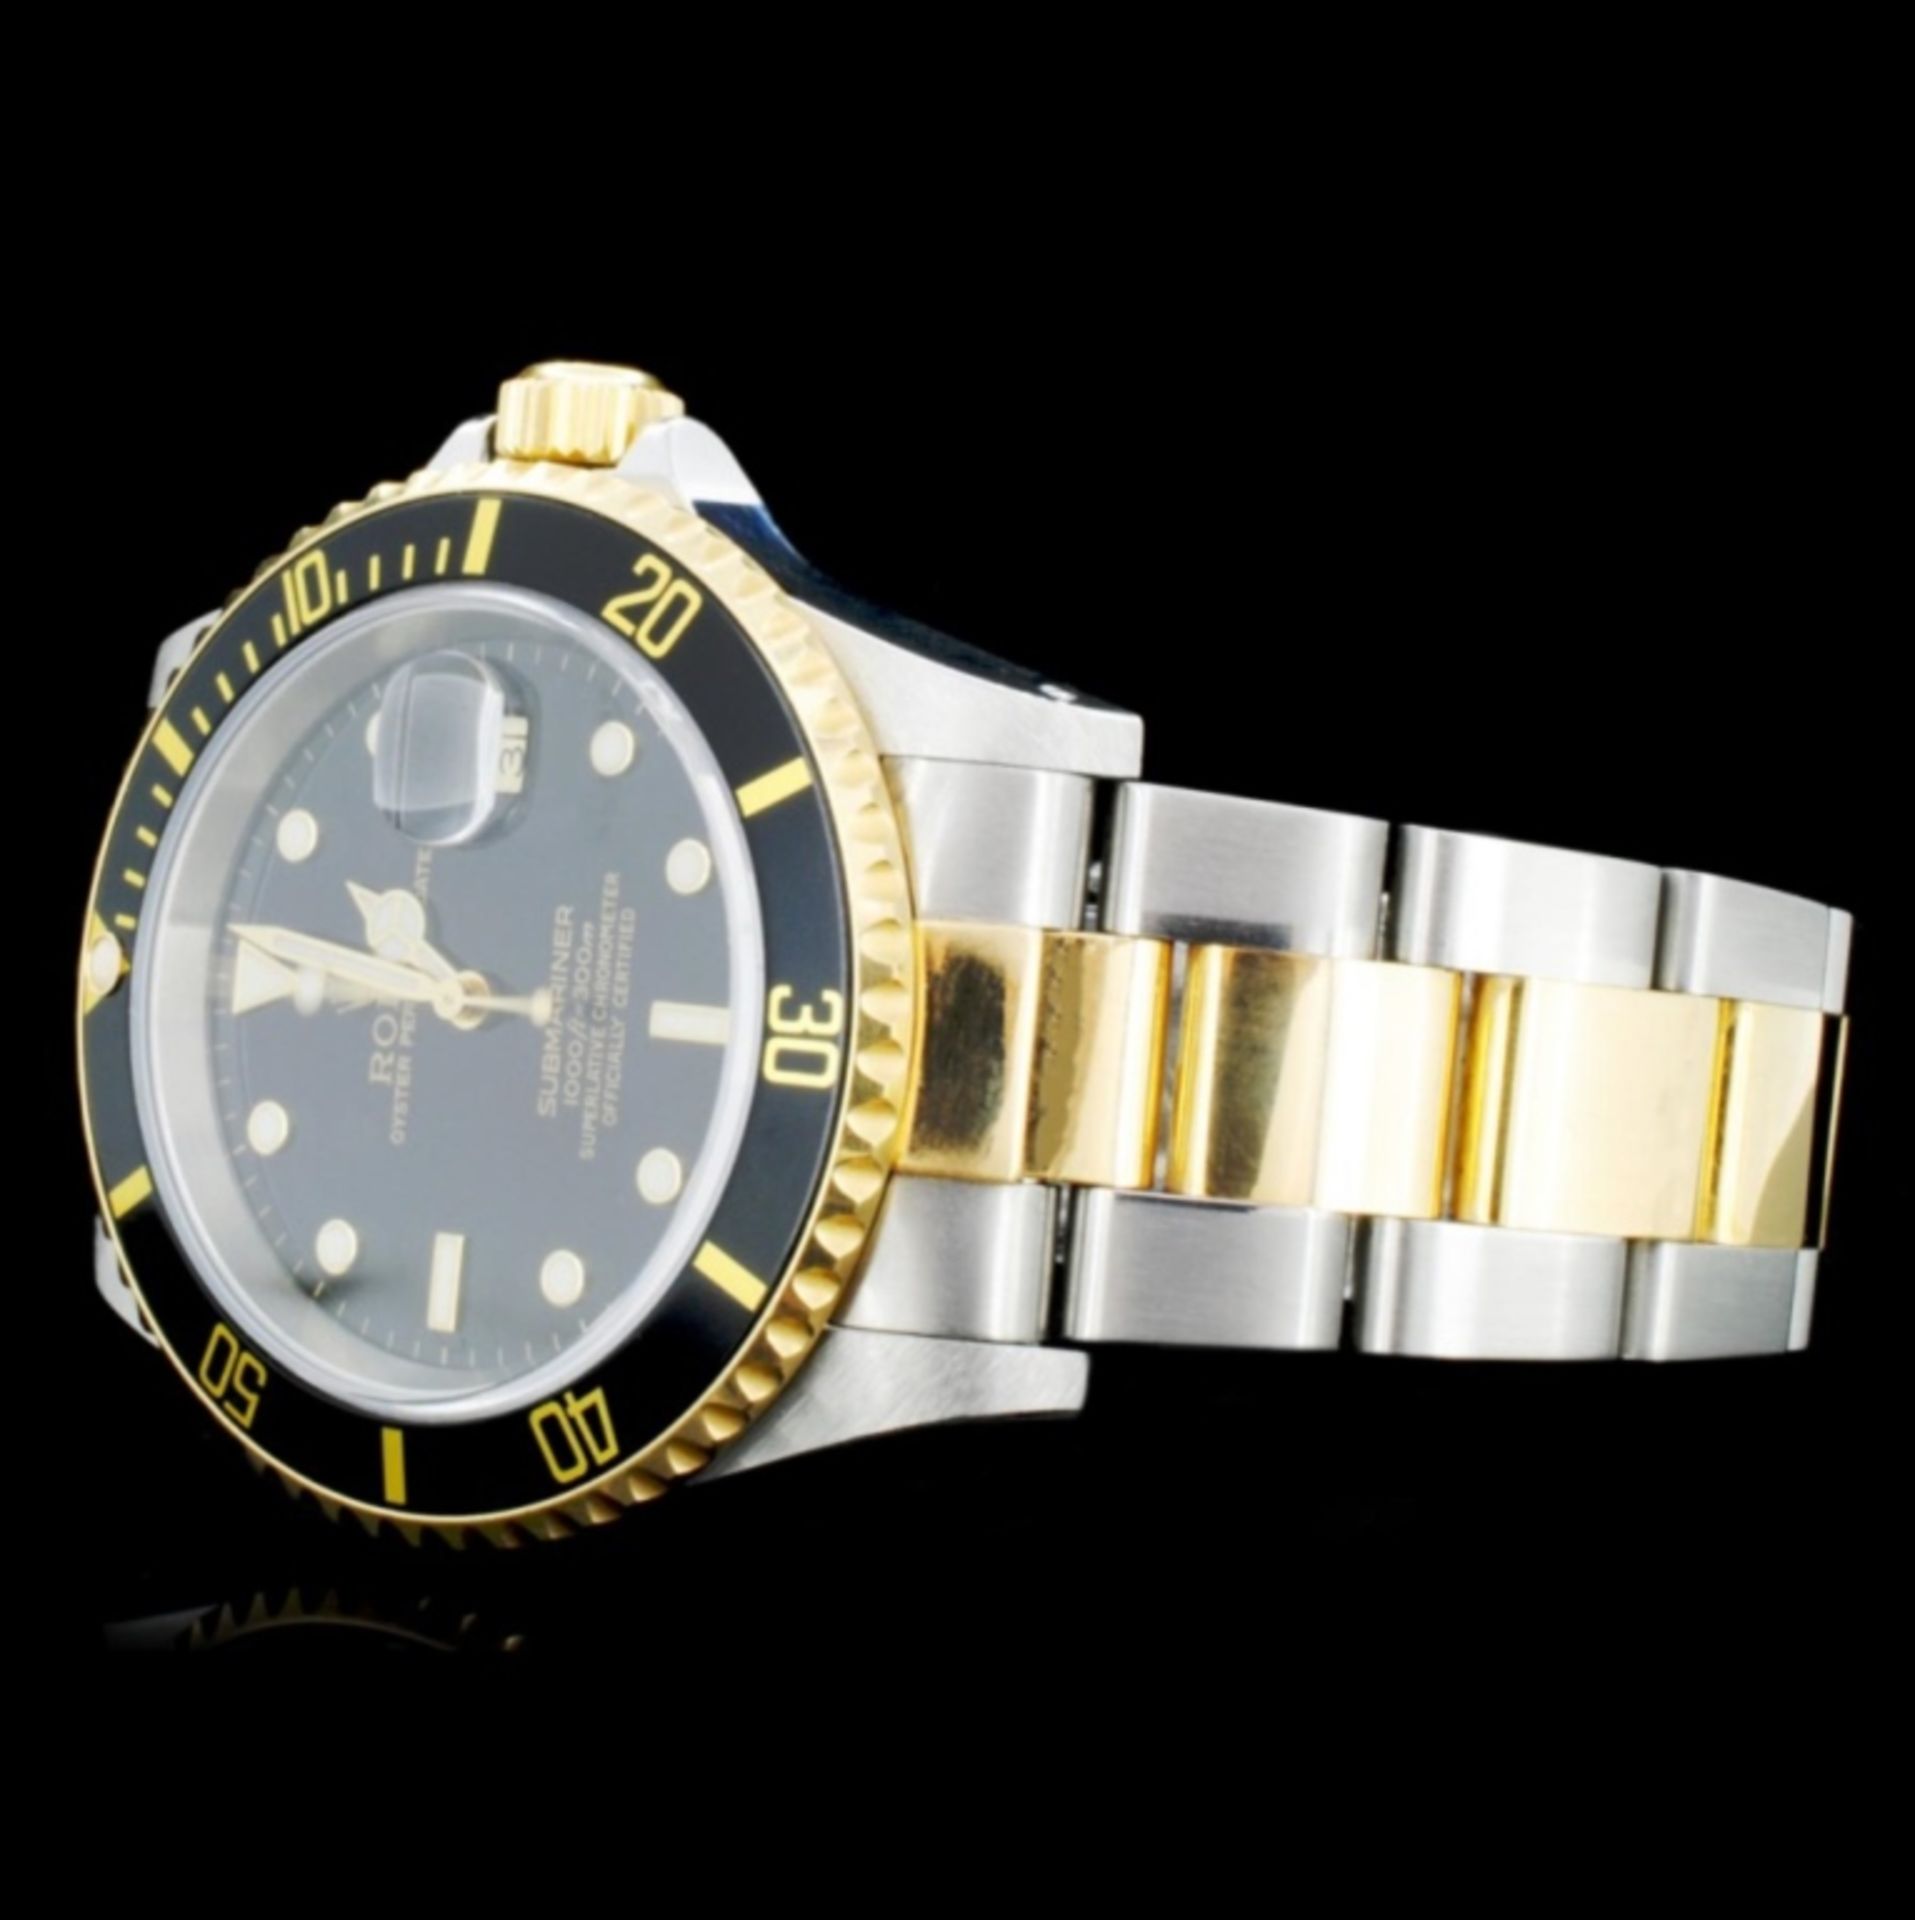 Rolex Submariner 18K & Stainless Steel 40MM Watch - Image 2 of 5